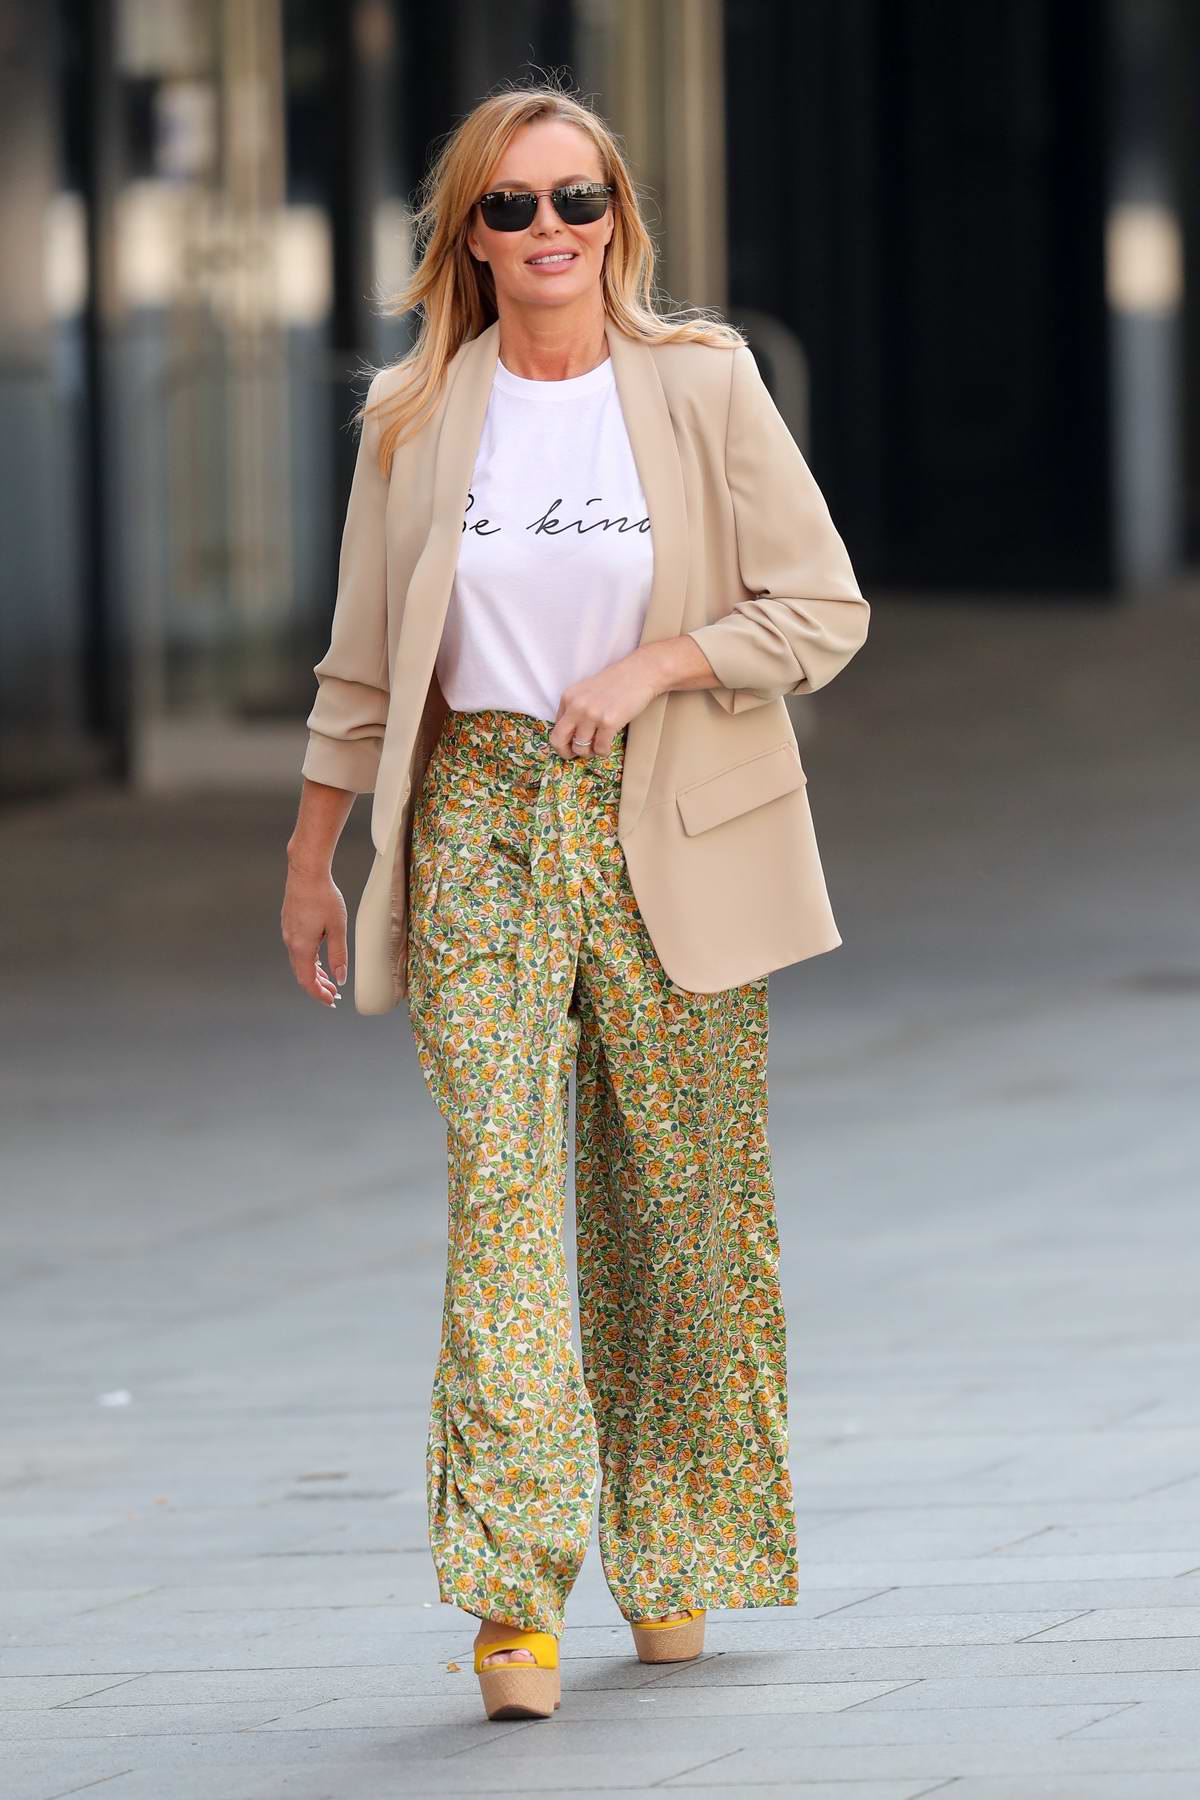 https://www.celebsfirst.com/wp-content/uploads/2020/04/amanda-holden-wears-zara-print-trousers-and-silkfred-slogan-top-as-she-exits-heart-radio-in-london-uk-090420_4.jpg